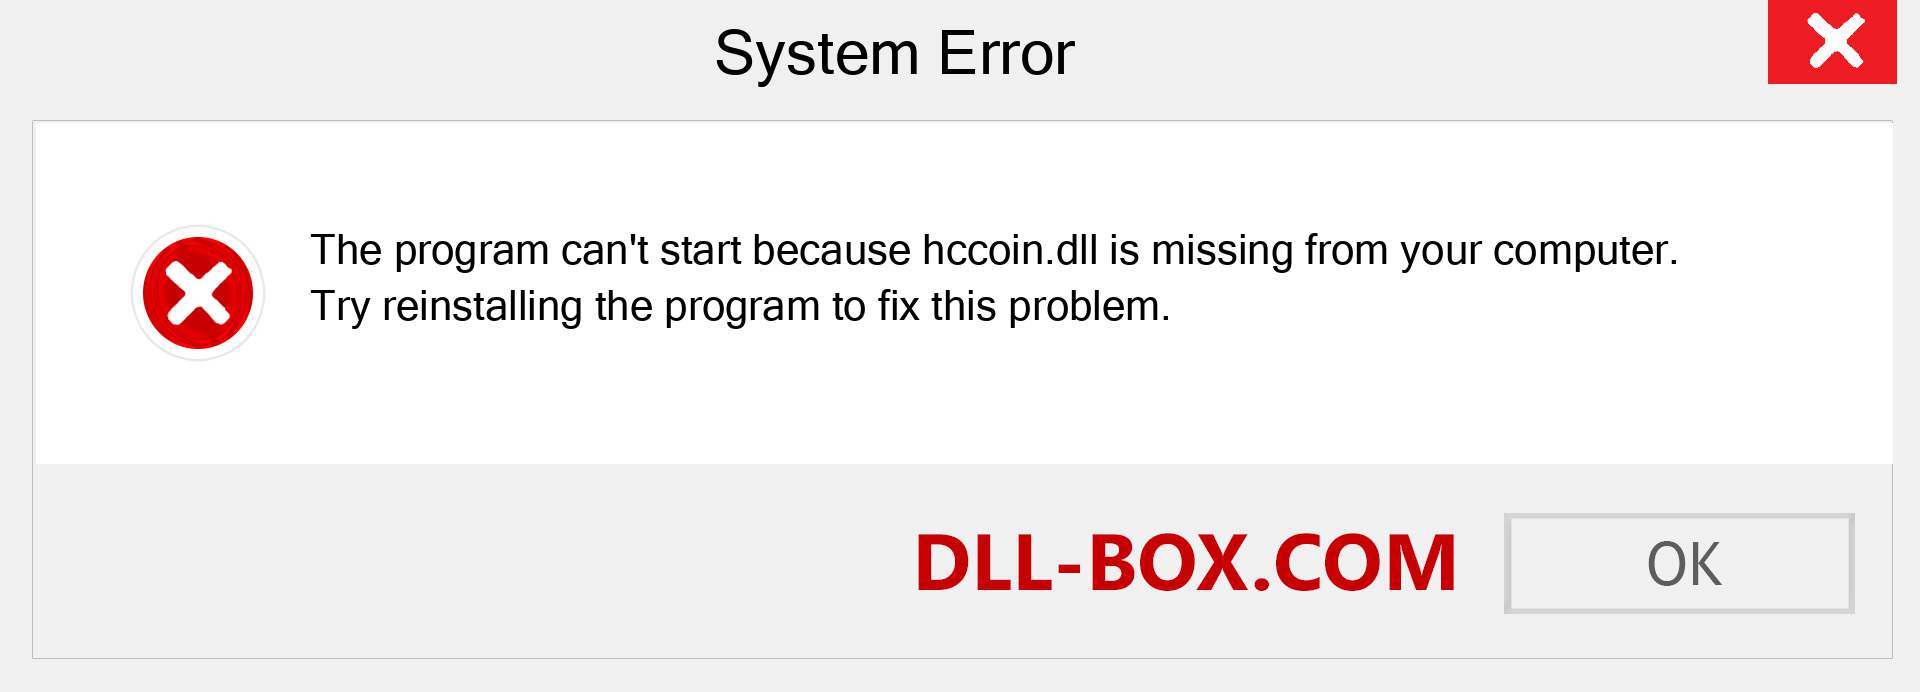  hccoin.dll file is missing?. Download for Windows 7, 8, 10 - Fix  hccoin dll Missing Error on Windows, photos, images